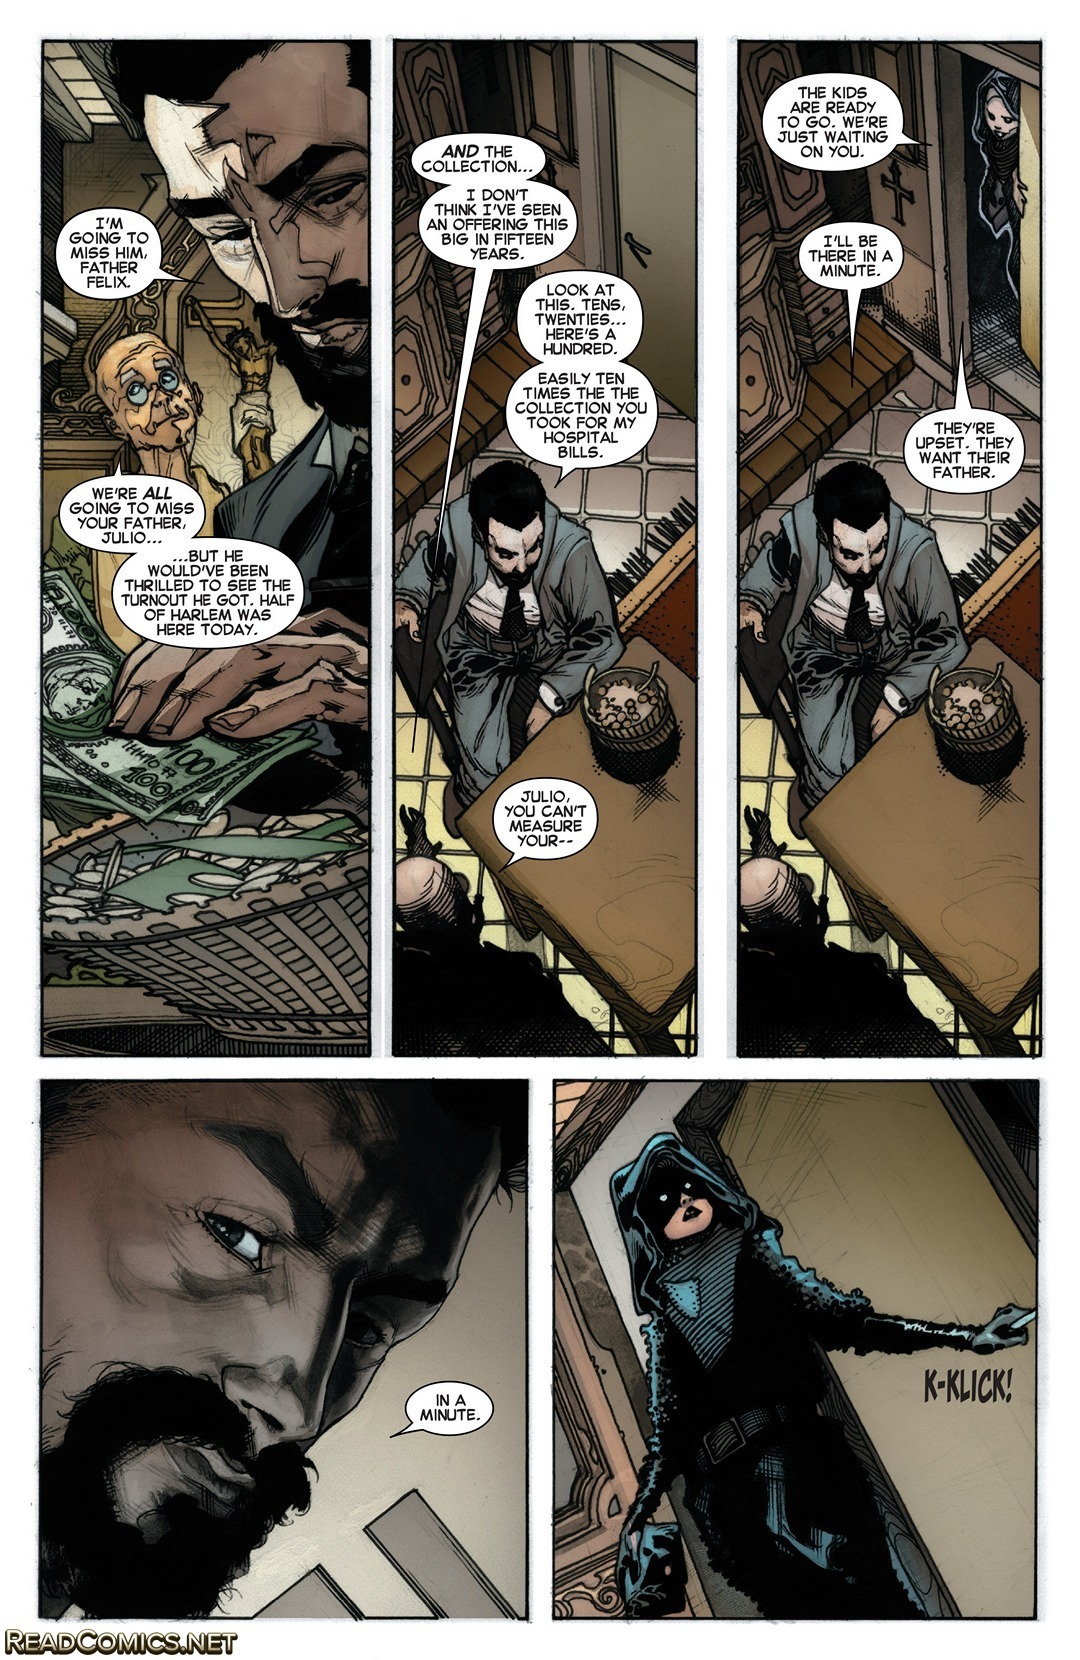 The Amazing Spider-Man (2015-): Chapter 1-4 - Page 4